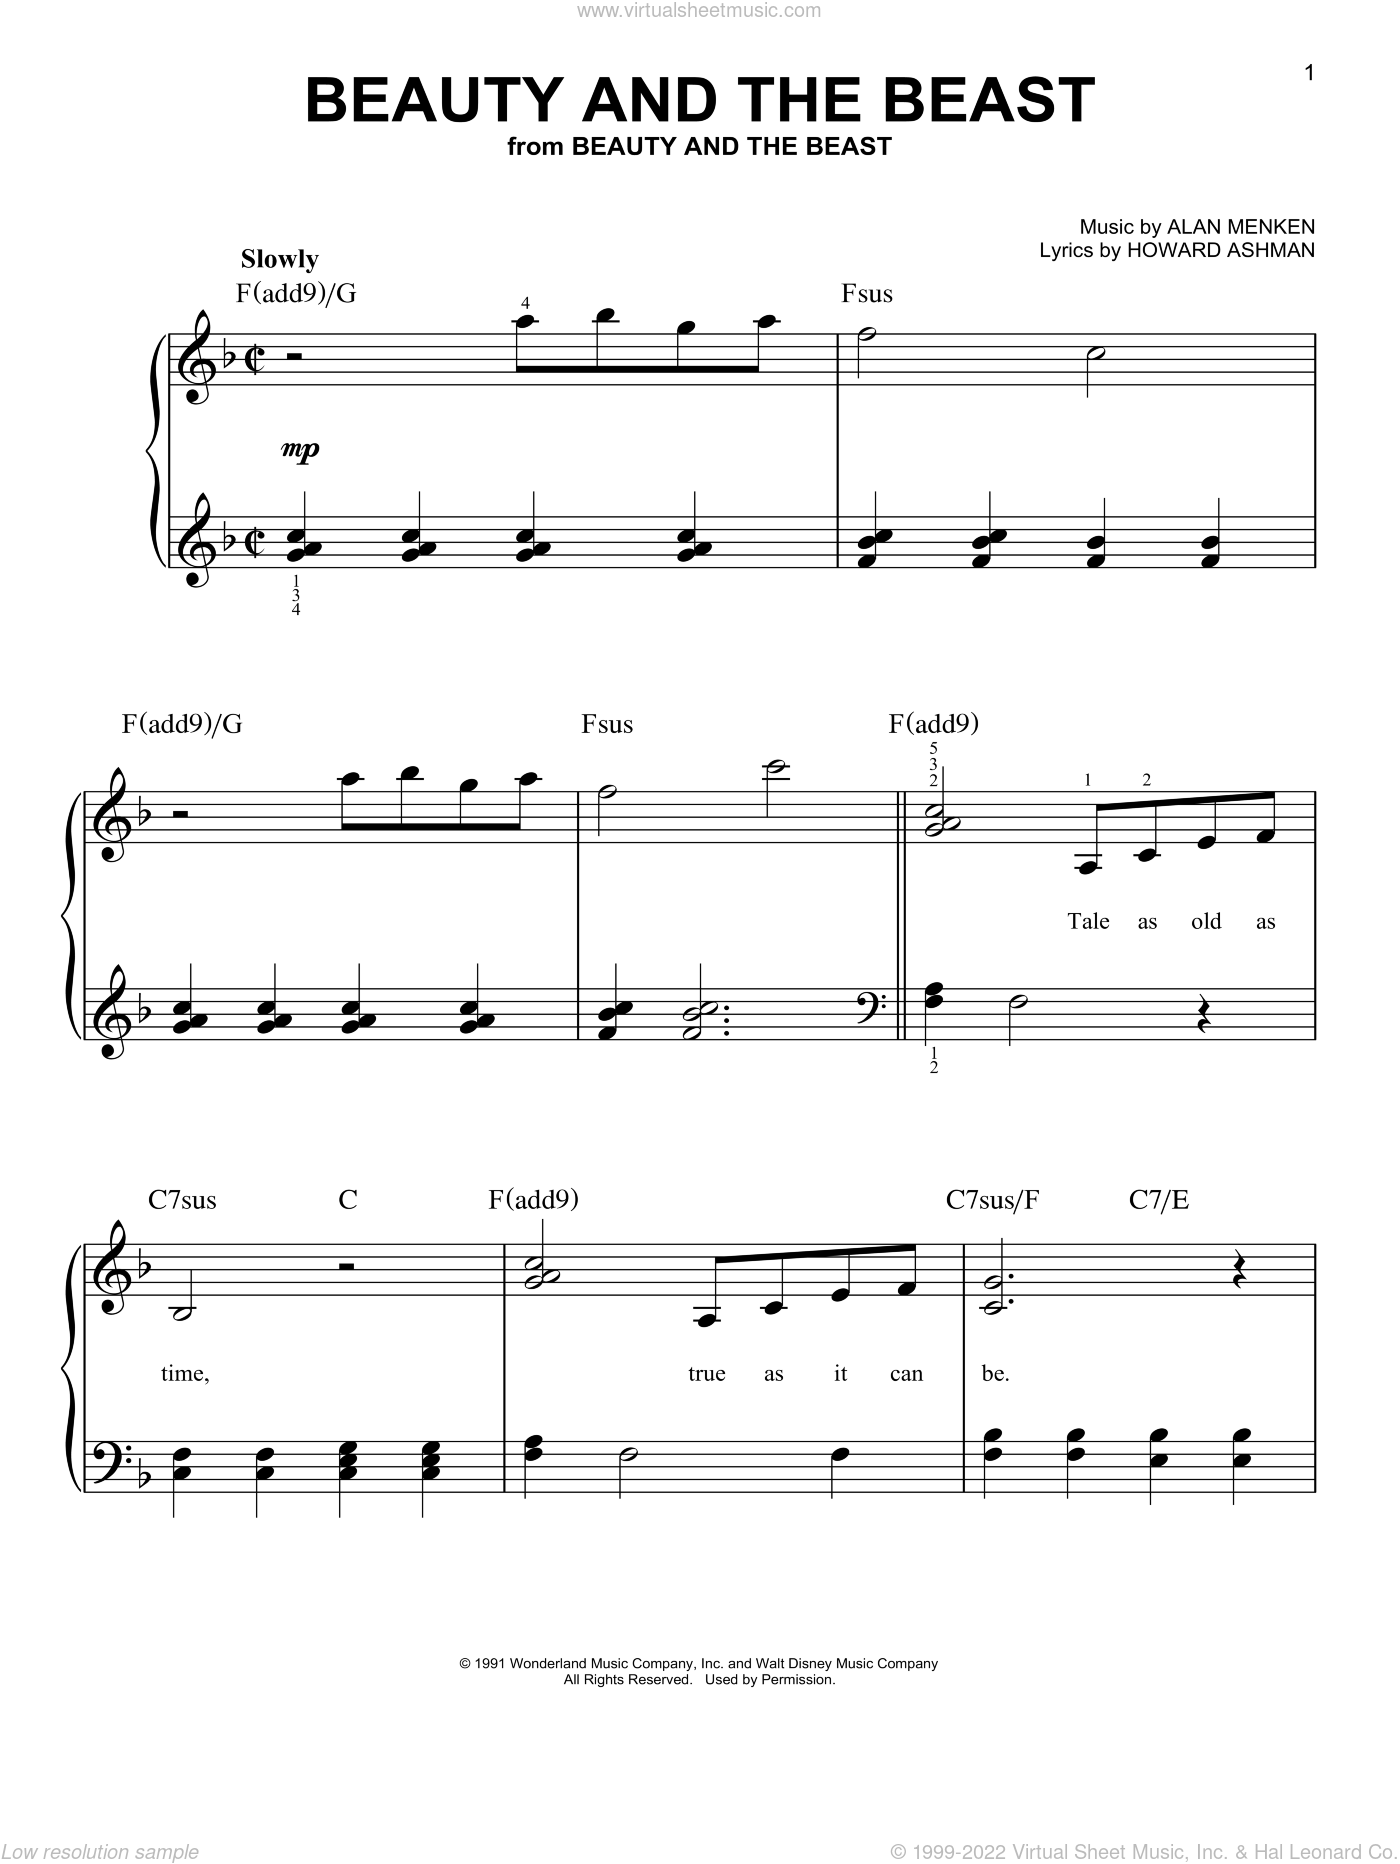 Lansbury - Beauty And The Beast sheet music for piano solo [PDF]